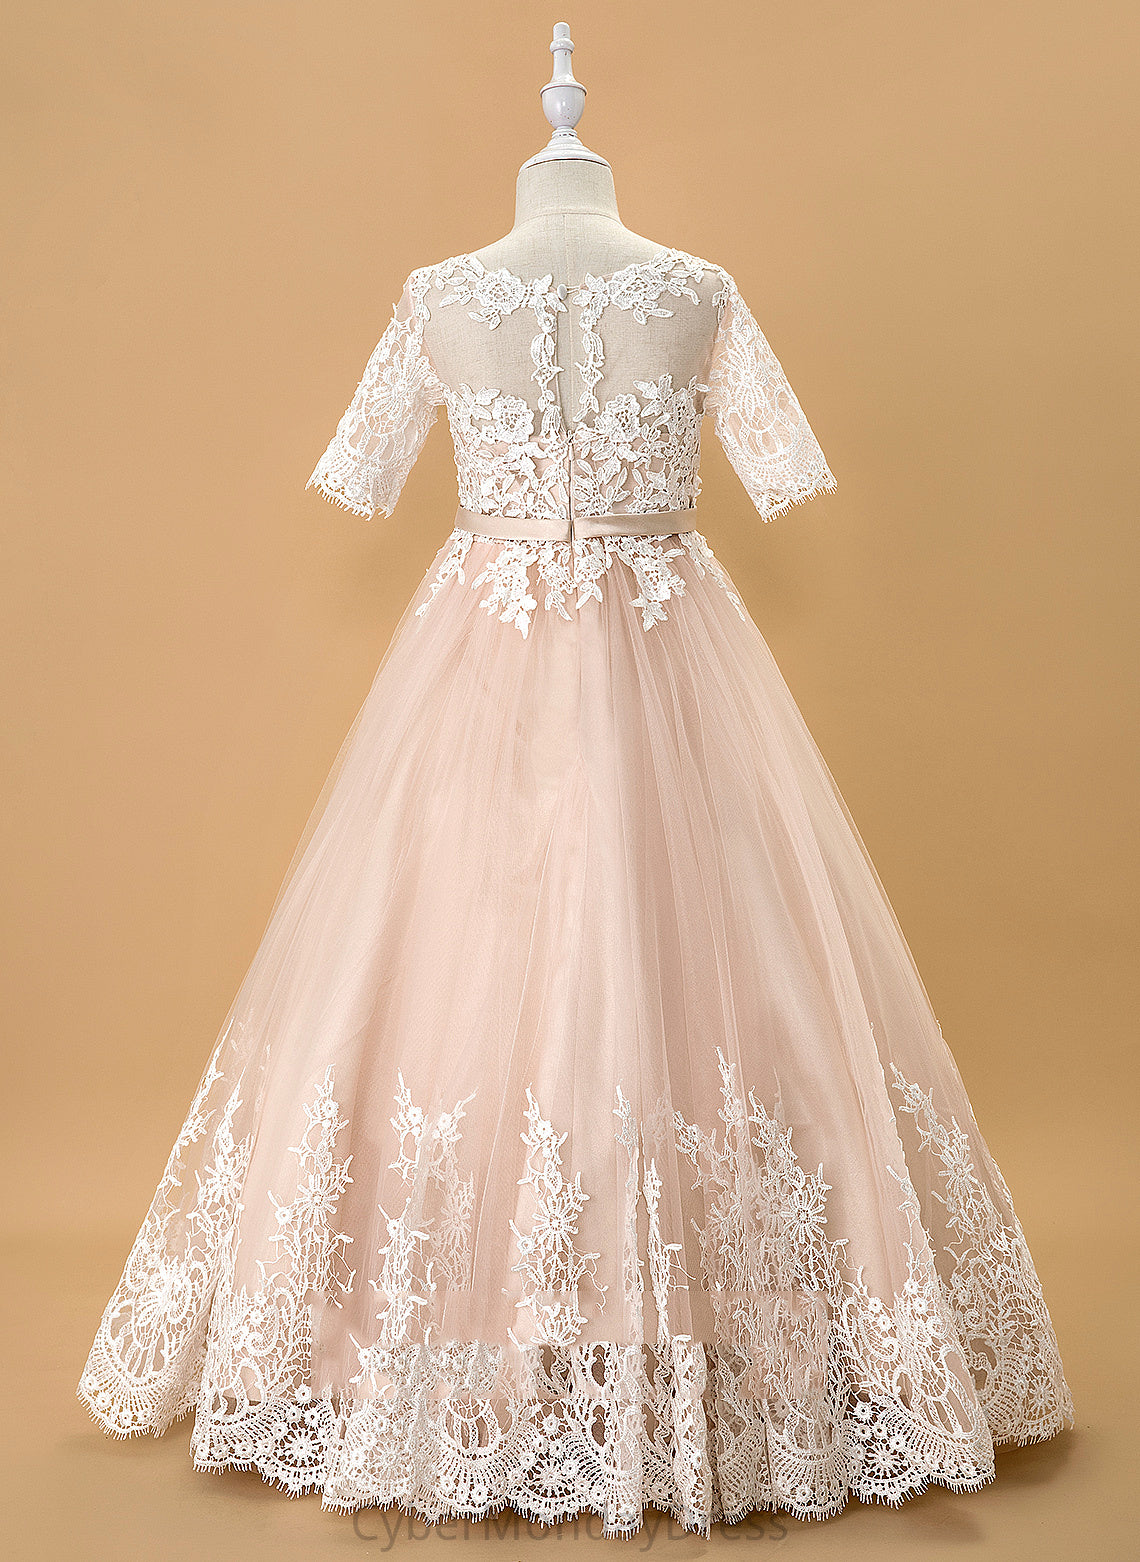 Floor-length Sleeves Neck With Bow(s) Ball-Gown/Princess Una 1/2 Dress Flower - Tulle/Lace Girl Flower Girl Dresses Scoop